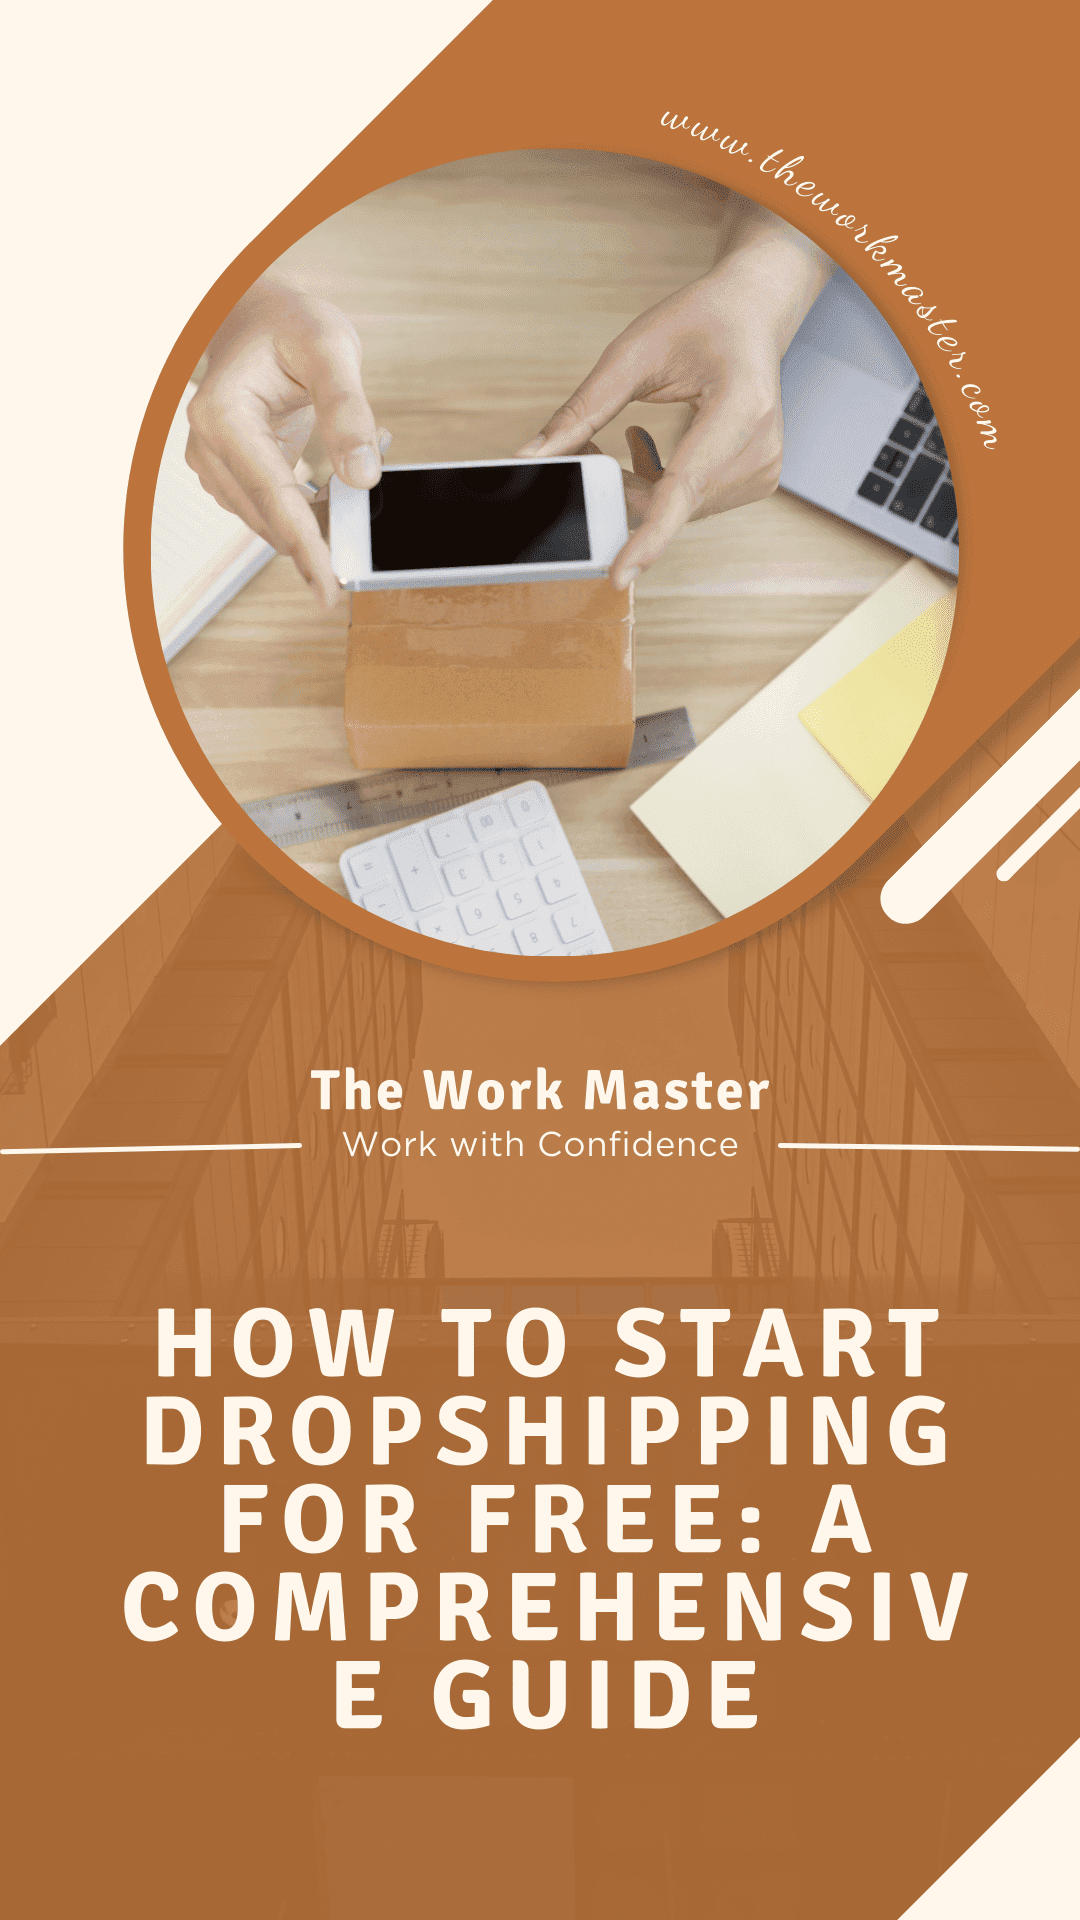 a pin about starting a dropshipping business for free